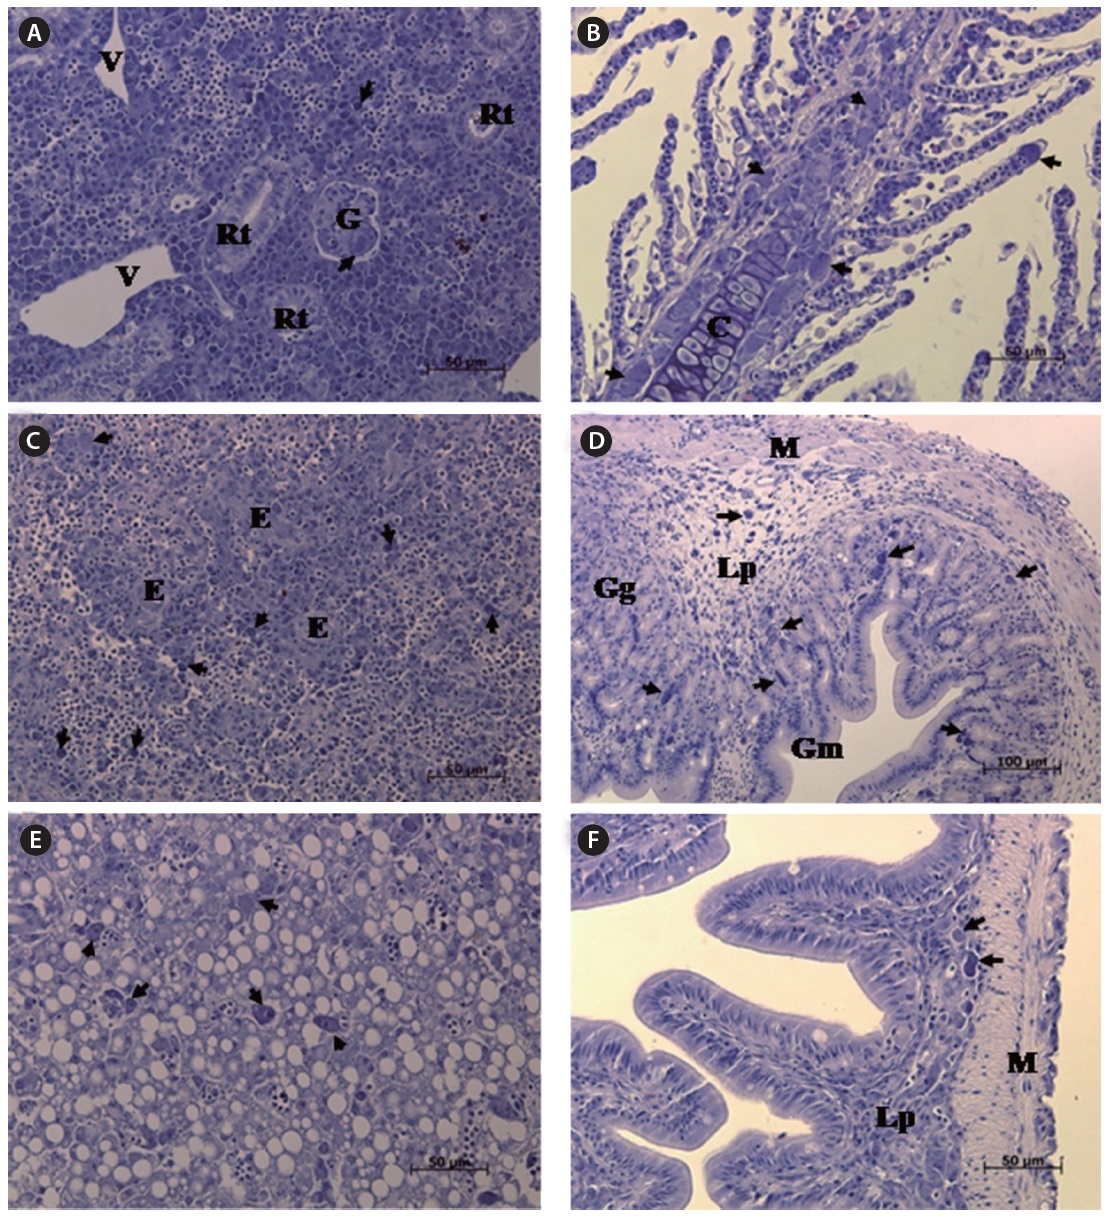 Histopathological changes of naturally infected starry flounder Platichthys stellatus with iridovirus. Enlarged cells were observed in the kidney (A), gill (B), spleen (C), stomach (D), liver (E), and intestine (F) of infected starry flounder. C, cartilage; E, elipsoid ; G, glomerulus; Gg, gastric gland ; Gm, gastic mucosa; Lp, laminar propria ; M, muscle ; Rt, renal tube; V, vein .Black arrows indicate the enlarged cells (scale bars: A-C, E, F = 50 μm, D = 100 μm). 4t